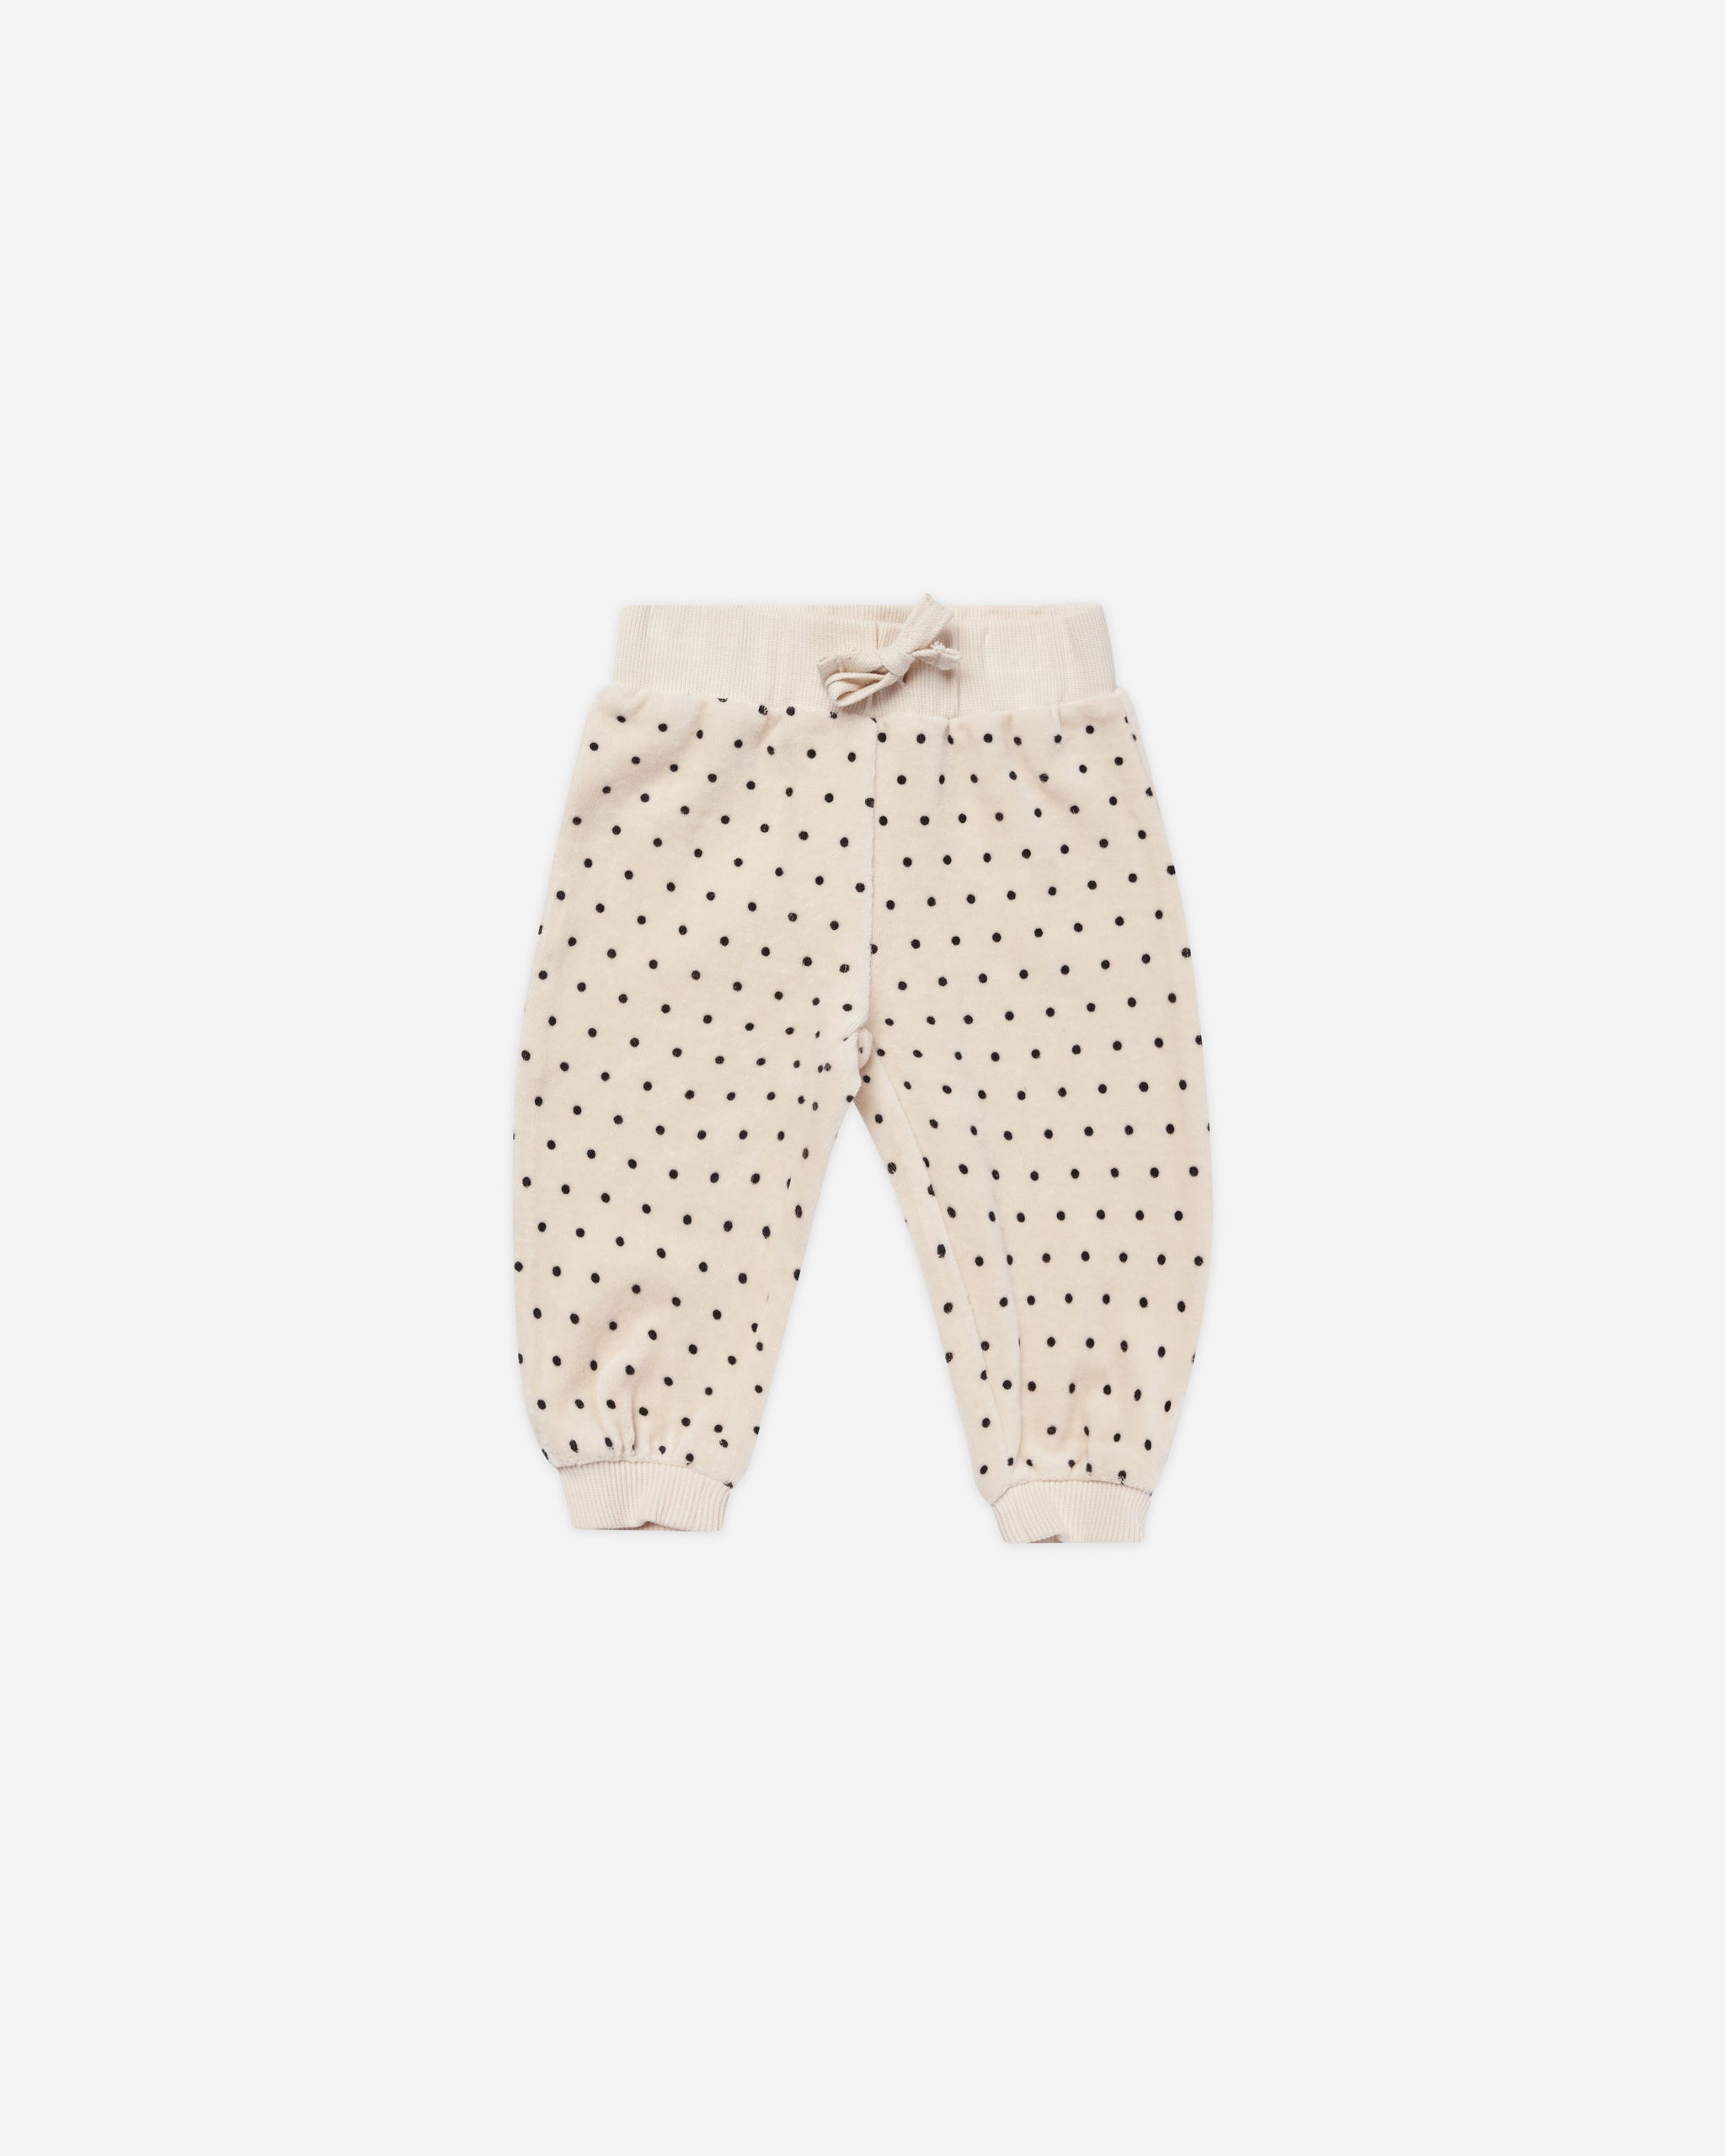 Velour Relaxed Sweatpant || Polka Dot - Rylee + Cru | Kids Clothes | Trendy Baby Clothes | Modern Infant Outfits |